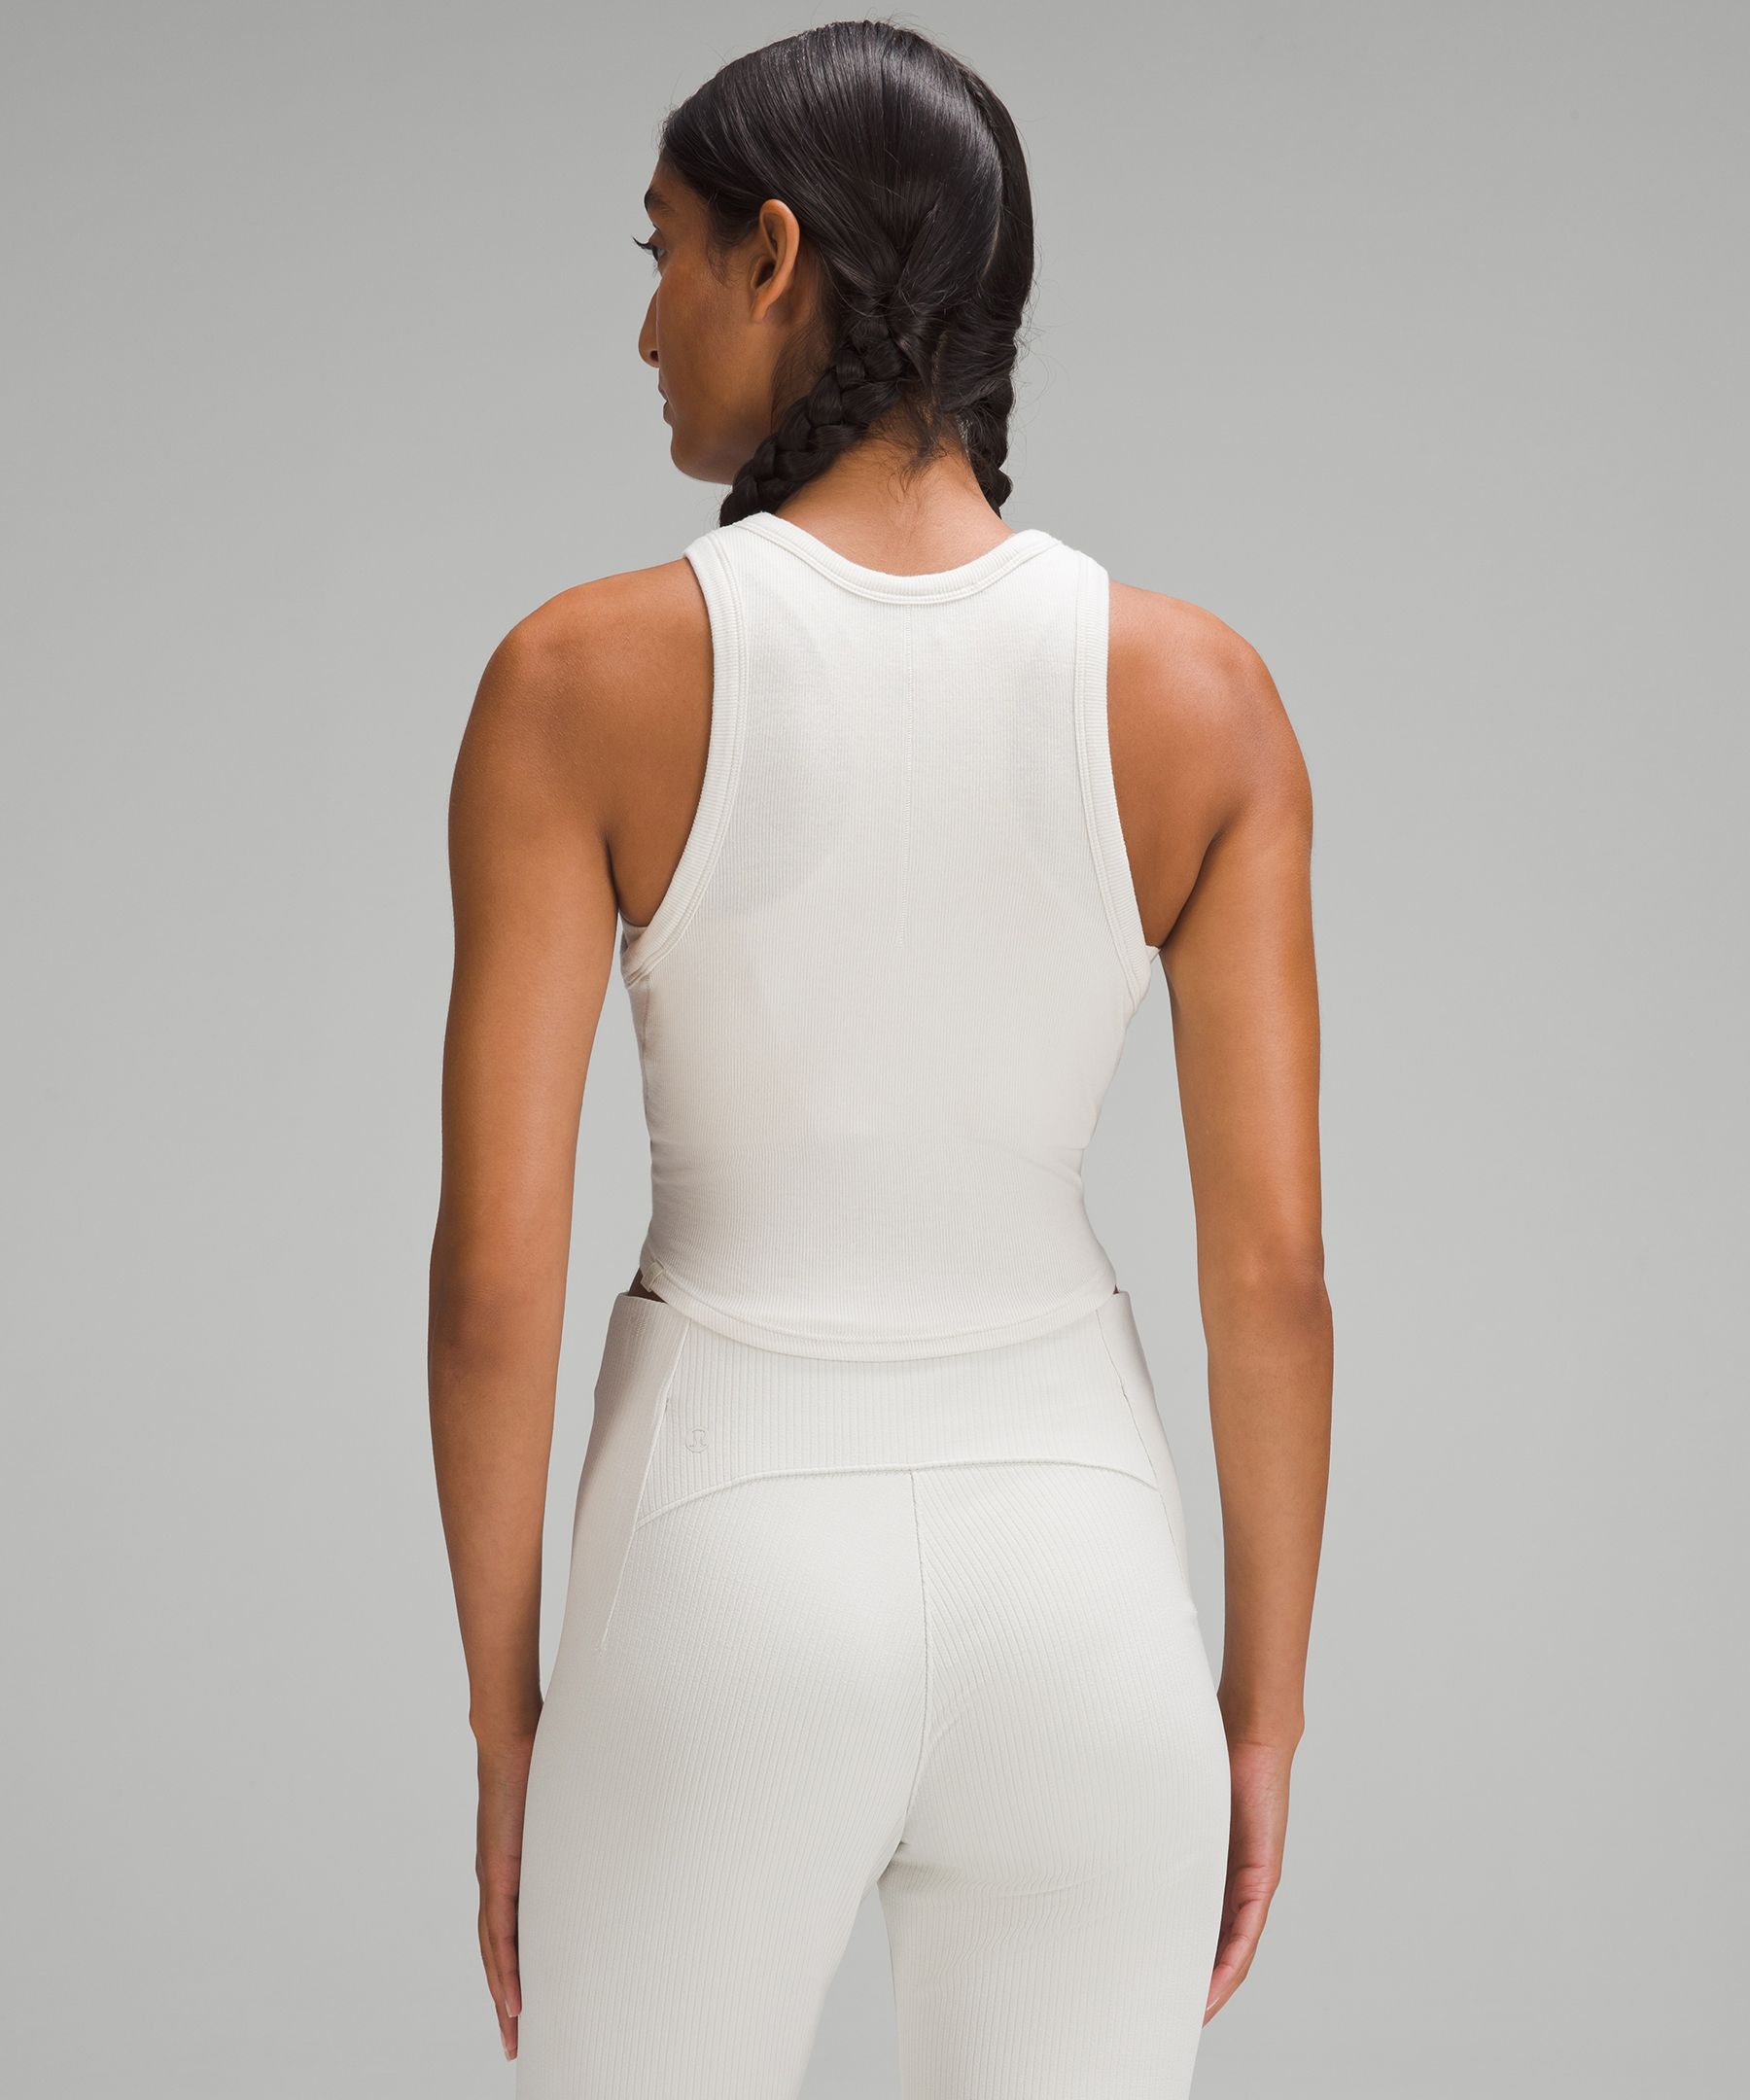 Lululemon Hold Tight Cropped Tank Top. 3